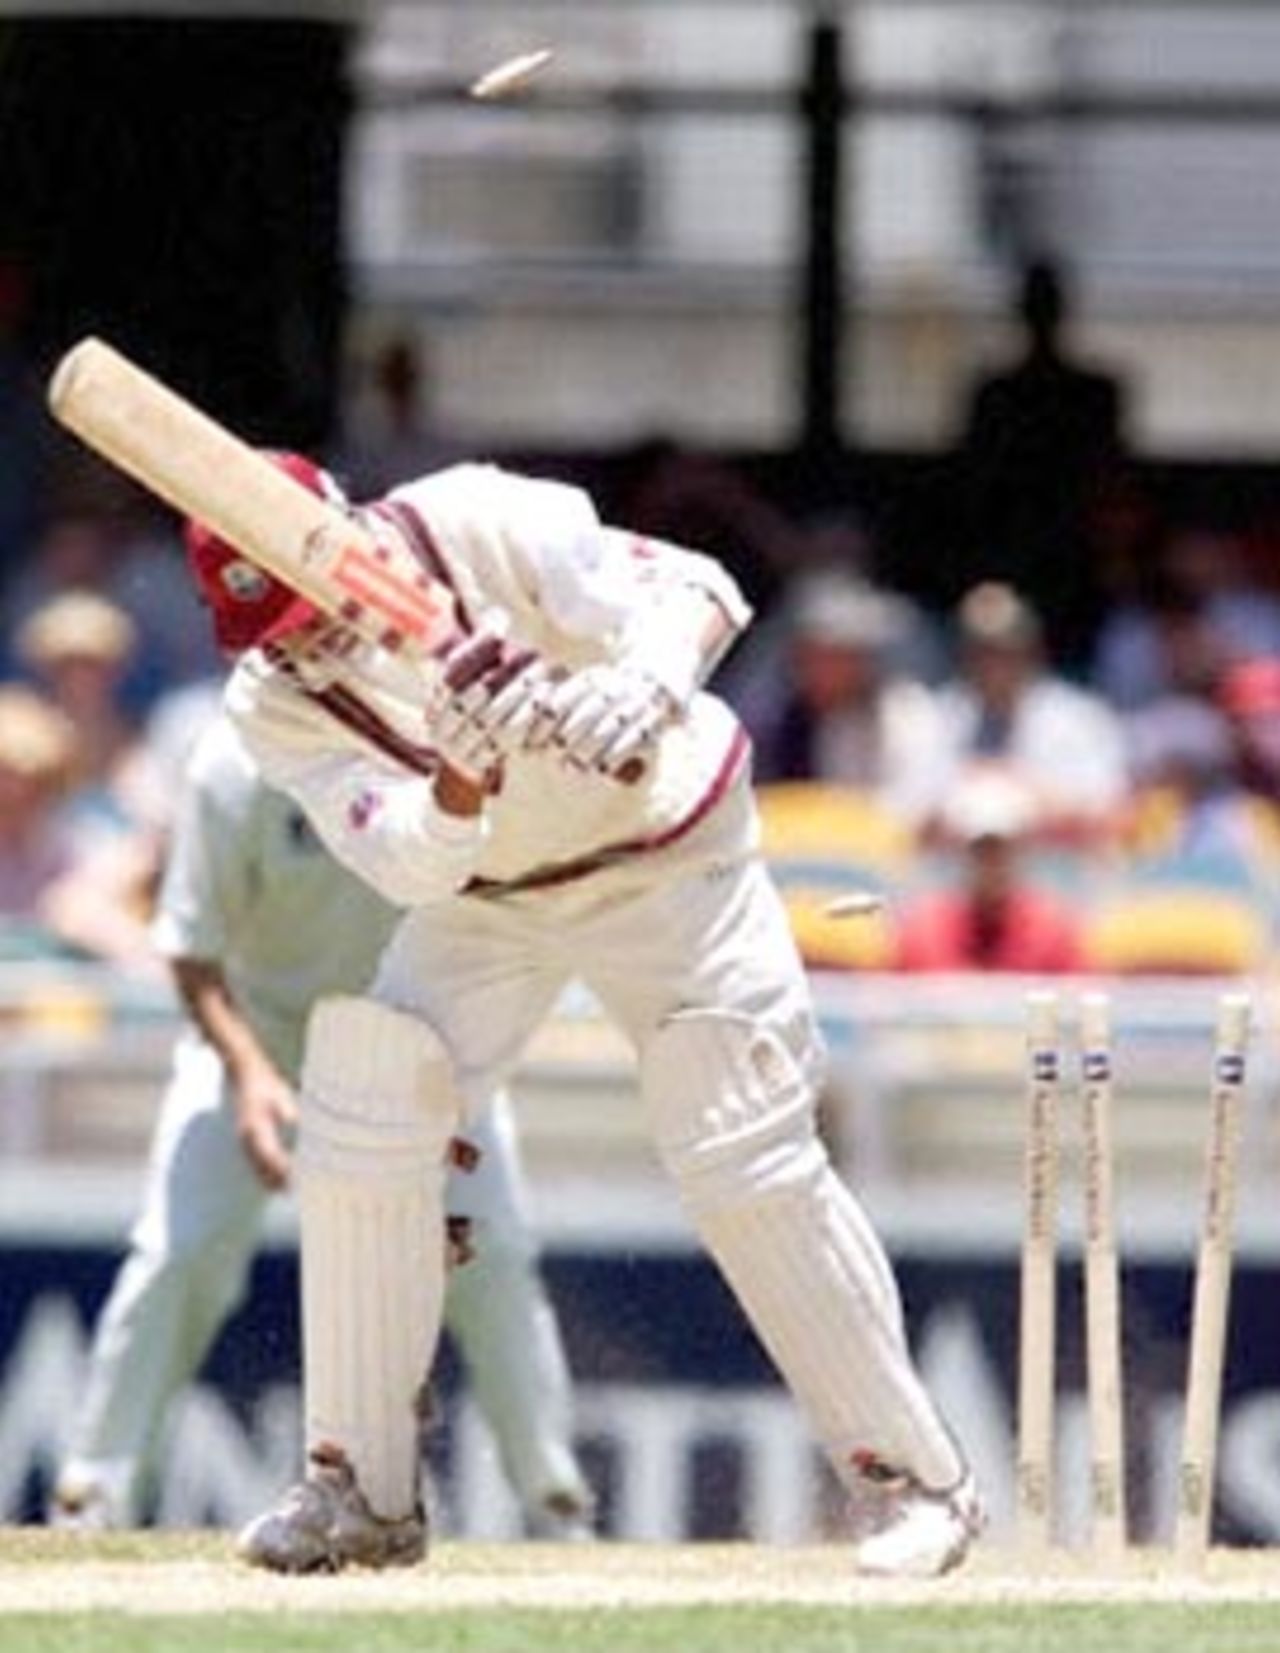 West Indian batsman Ramnaresh Sarwan is clean bowled by Australian fast bowler Brett Lee on the third day of the first Test match at the Gabba in Brisbane, 25 November 2000. At lunch the West Indies were struggling in their second innings at 81-6, still trailing Australia by 169 runs.